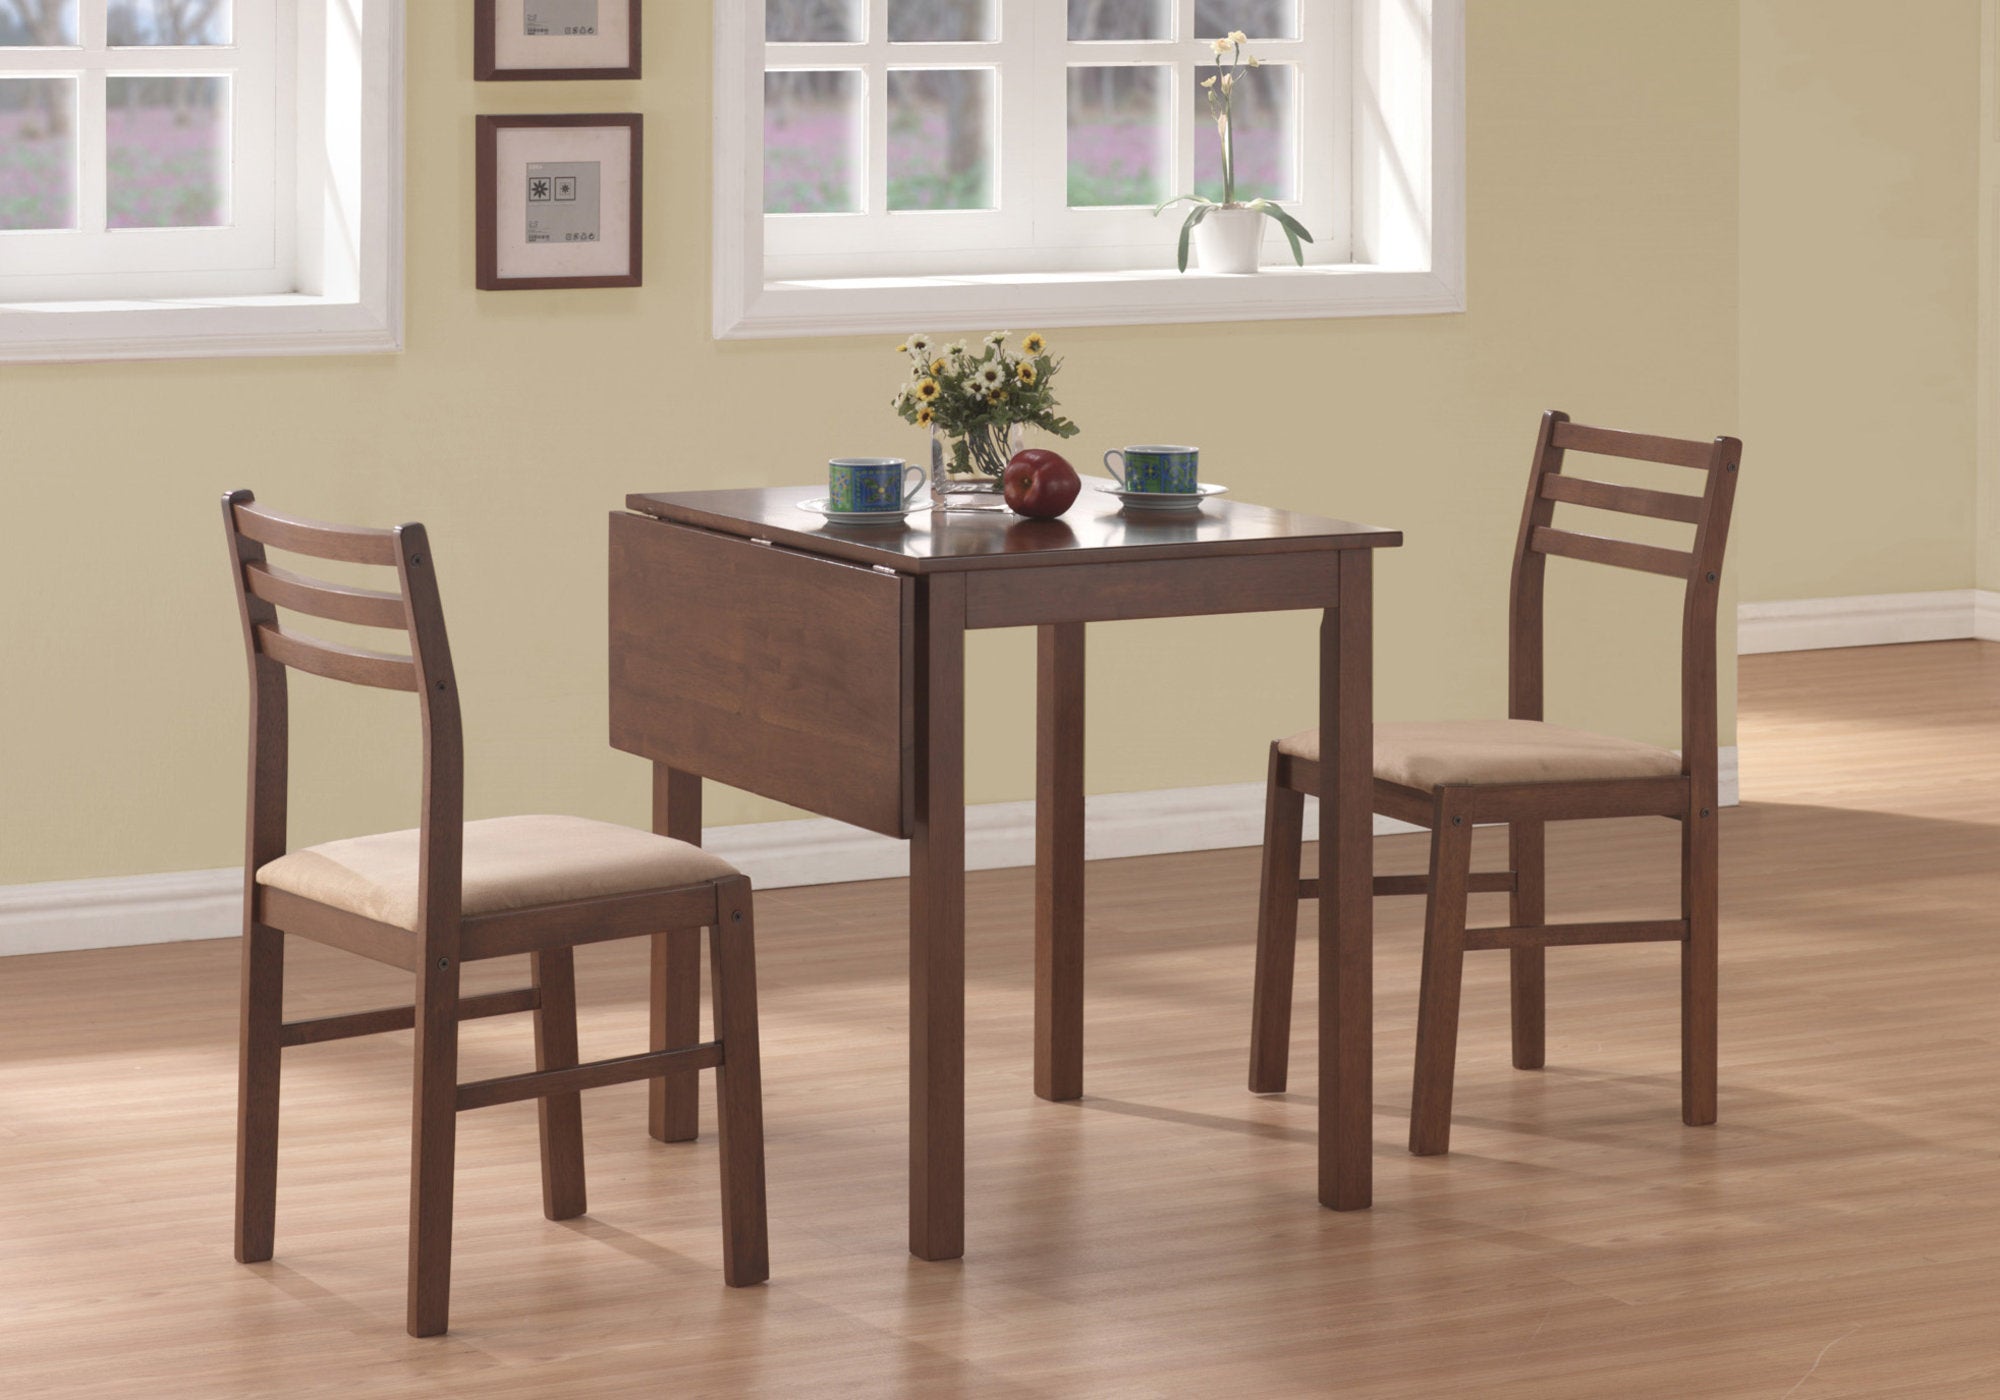 Valner Wooden Drop Leaf Dining Table With 2 Chairs (Walnut - 3 Pcs Set)